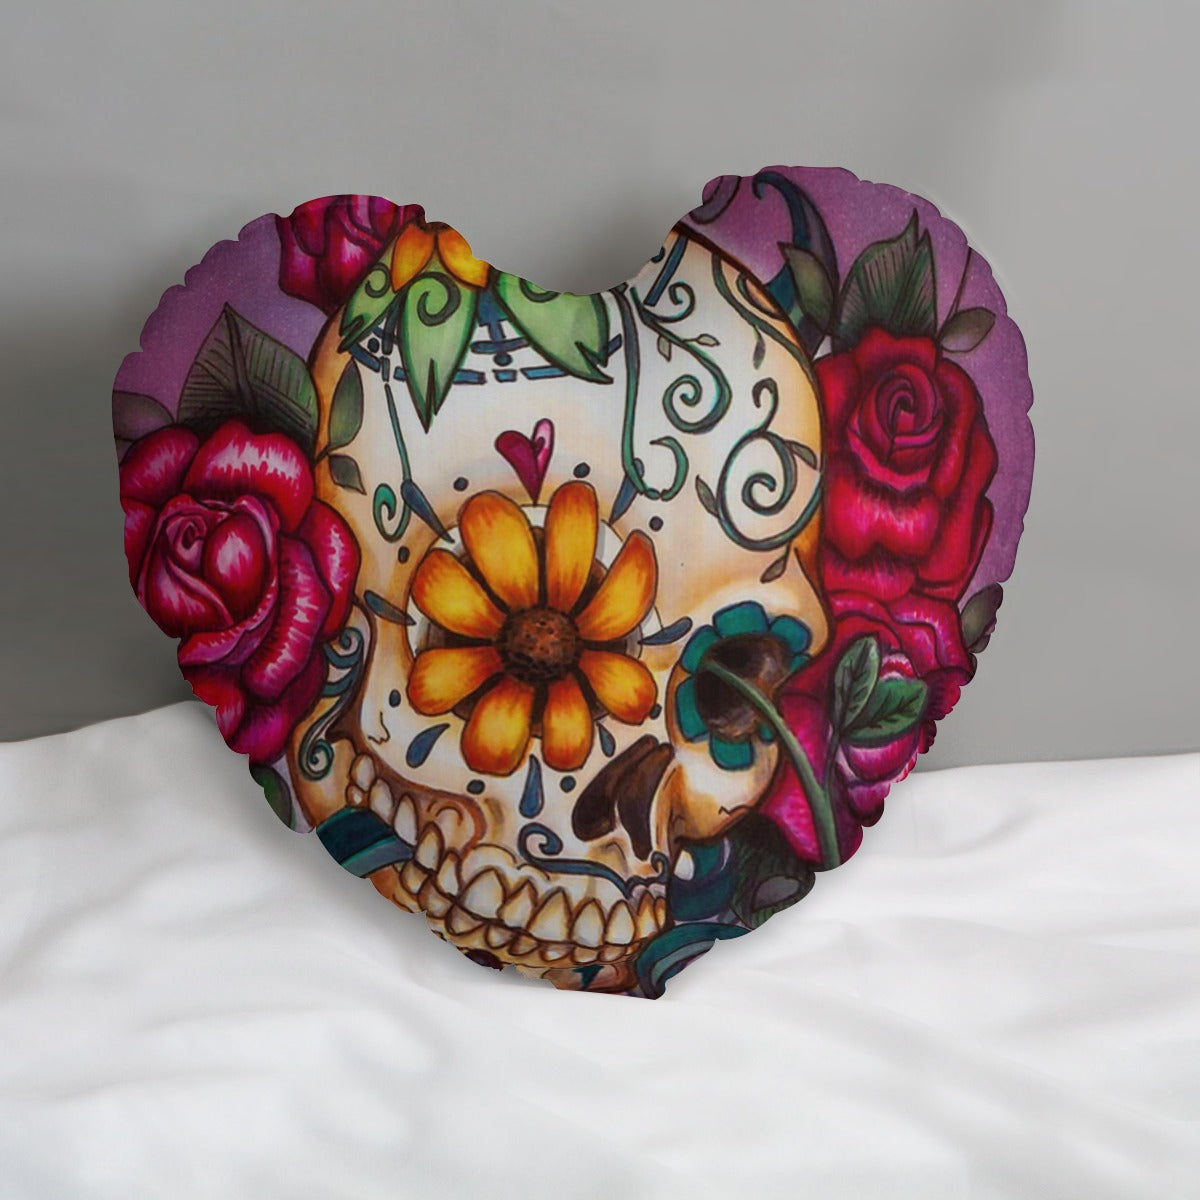 Sugar skull day of the dead All-Over Print Heart-shaped pillow